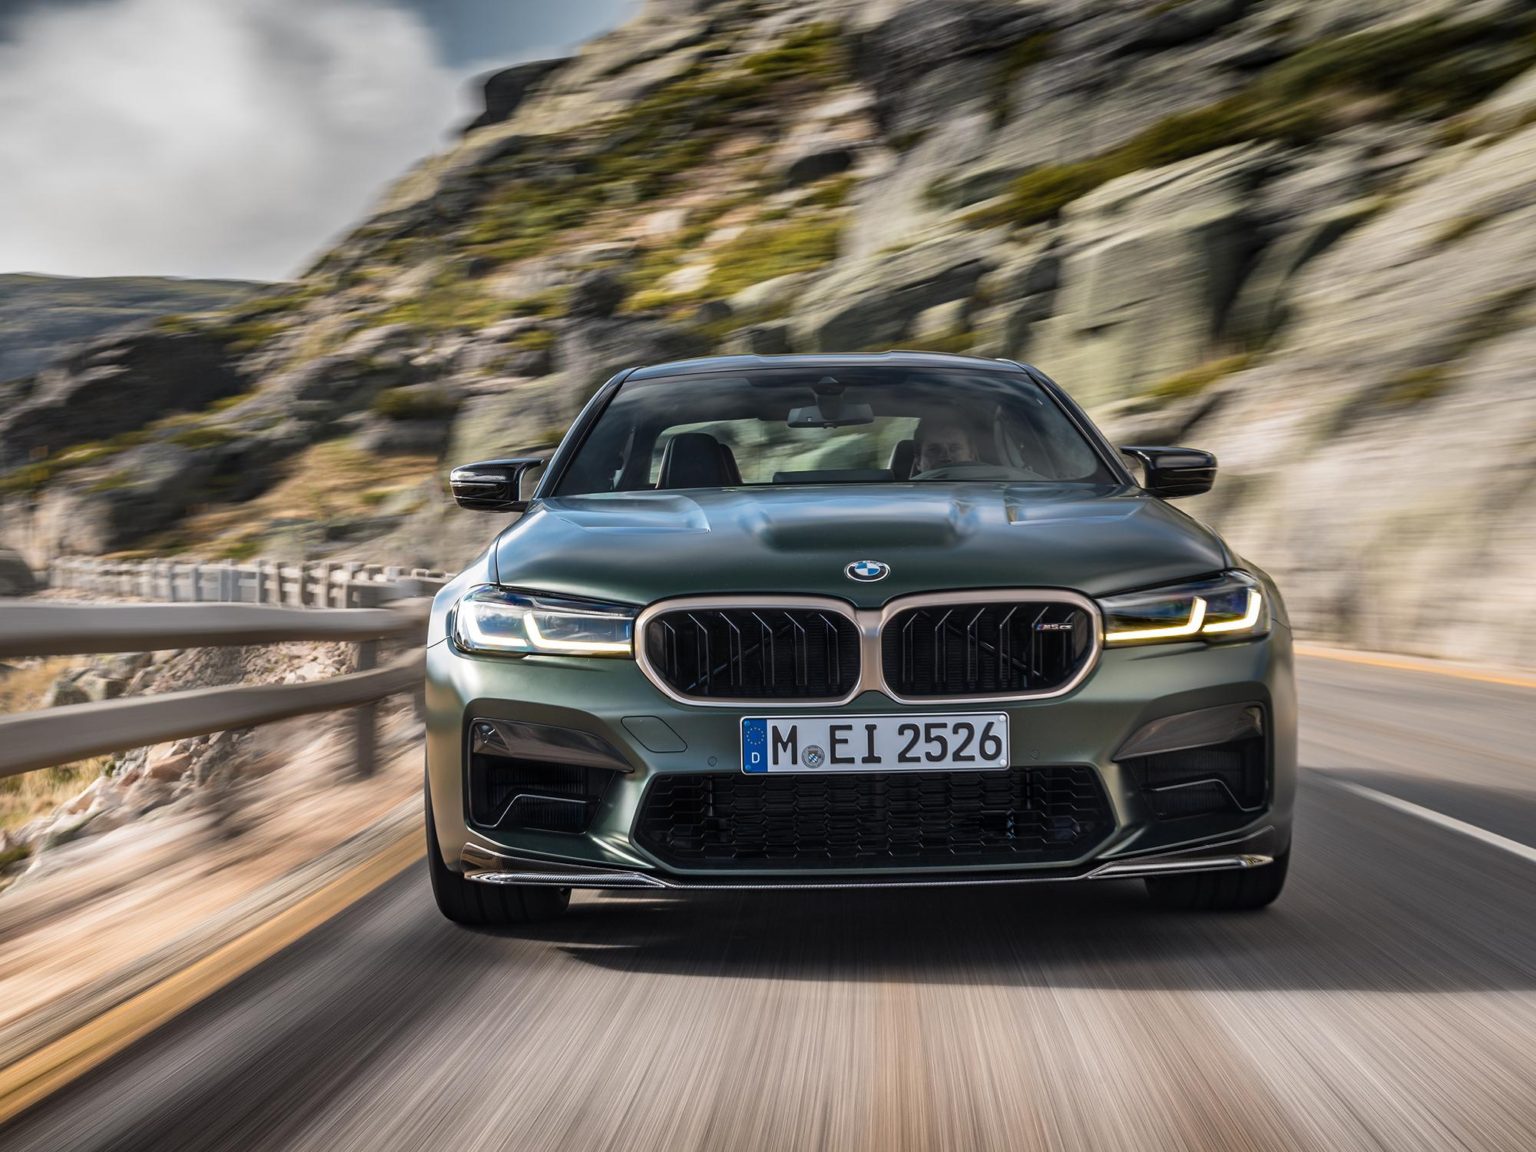 The 2022 BMW M5 CS Sedan is the quickest, most powerful vehicle the company has ever produced.